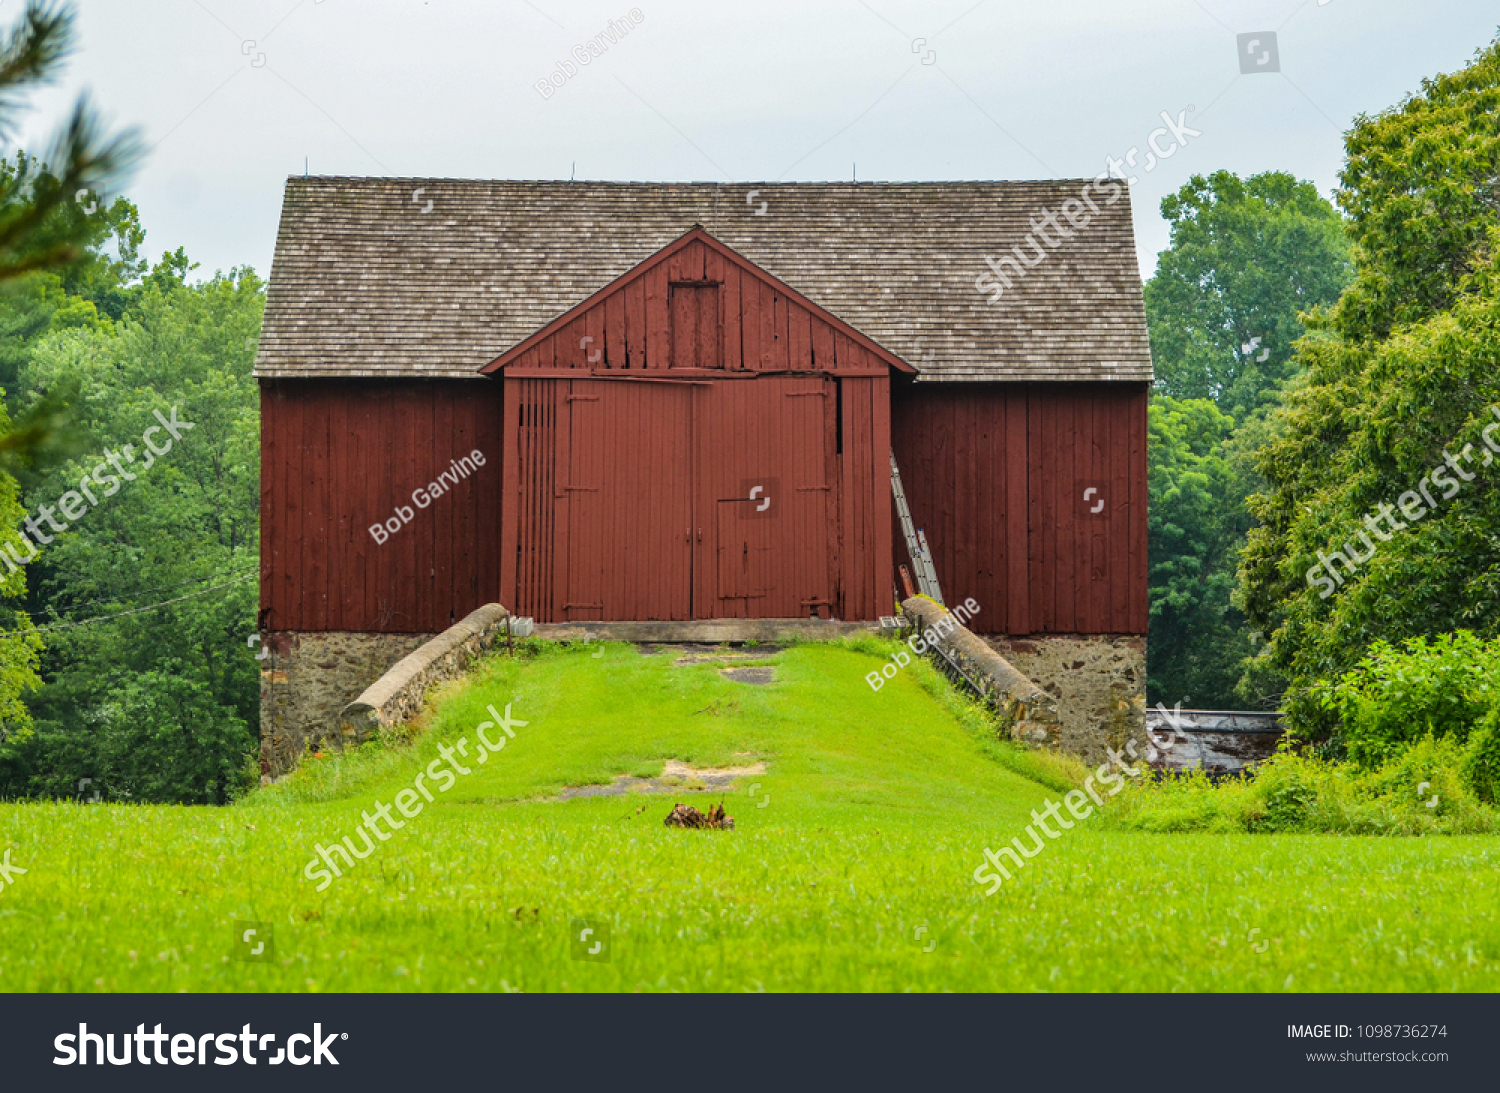 Old Red Barn Green Grass Ramp Stock Photo Edit Now 1098736274